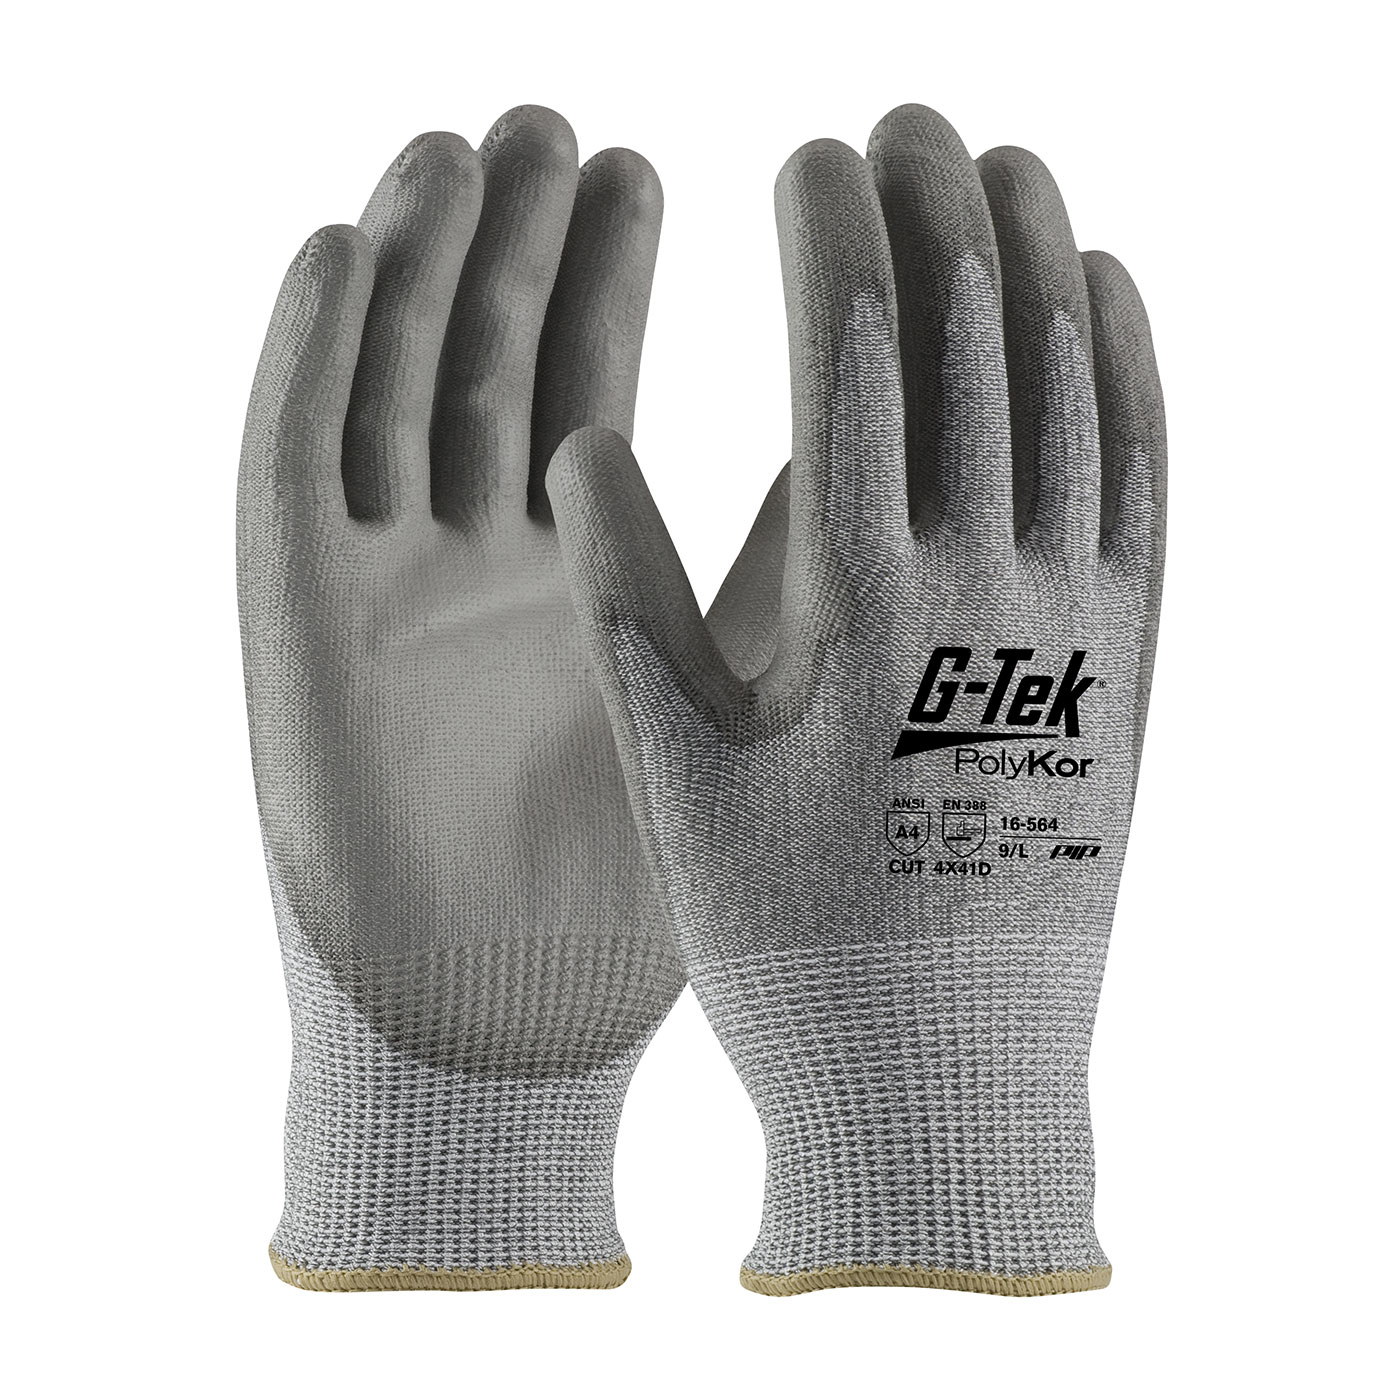 PIP 16-564/XL G-Tek PolyKor Industry Grade Seamless Knit PolyKor Blended Glove with Polyurethane Coated Smooth Grip on Palm & Fingers - X-Large PID-16564XL